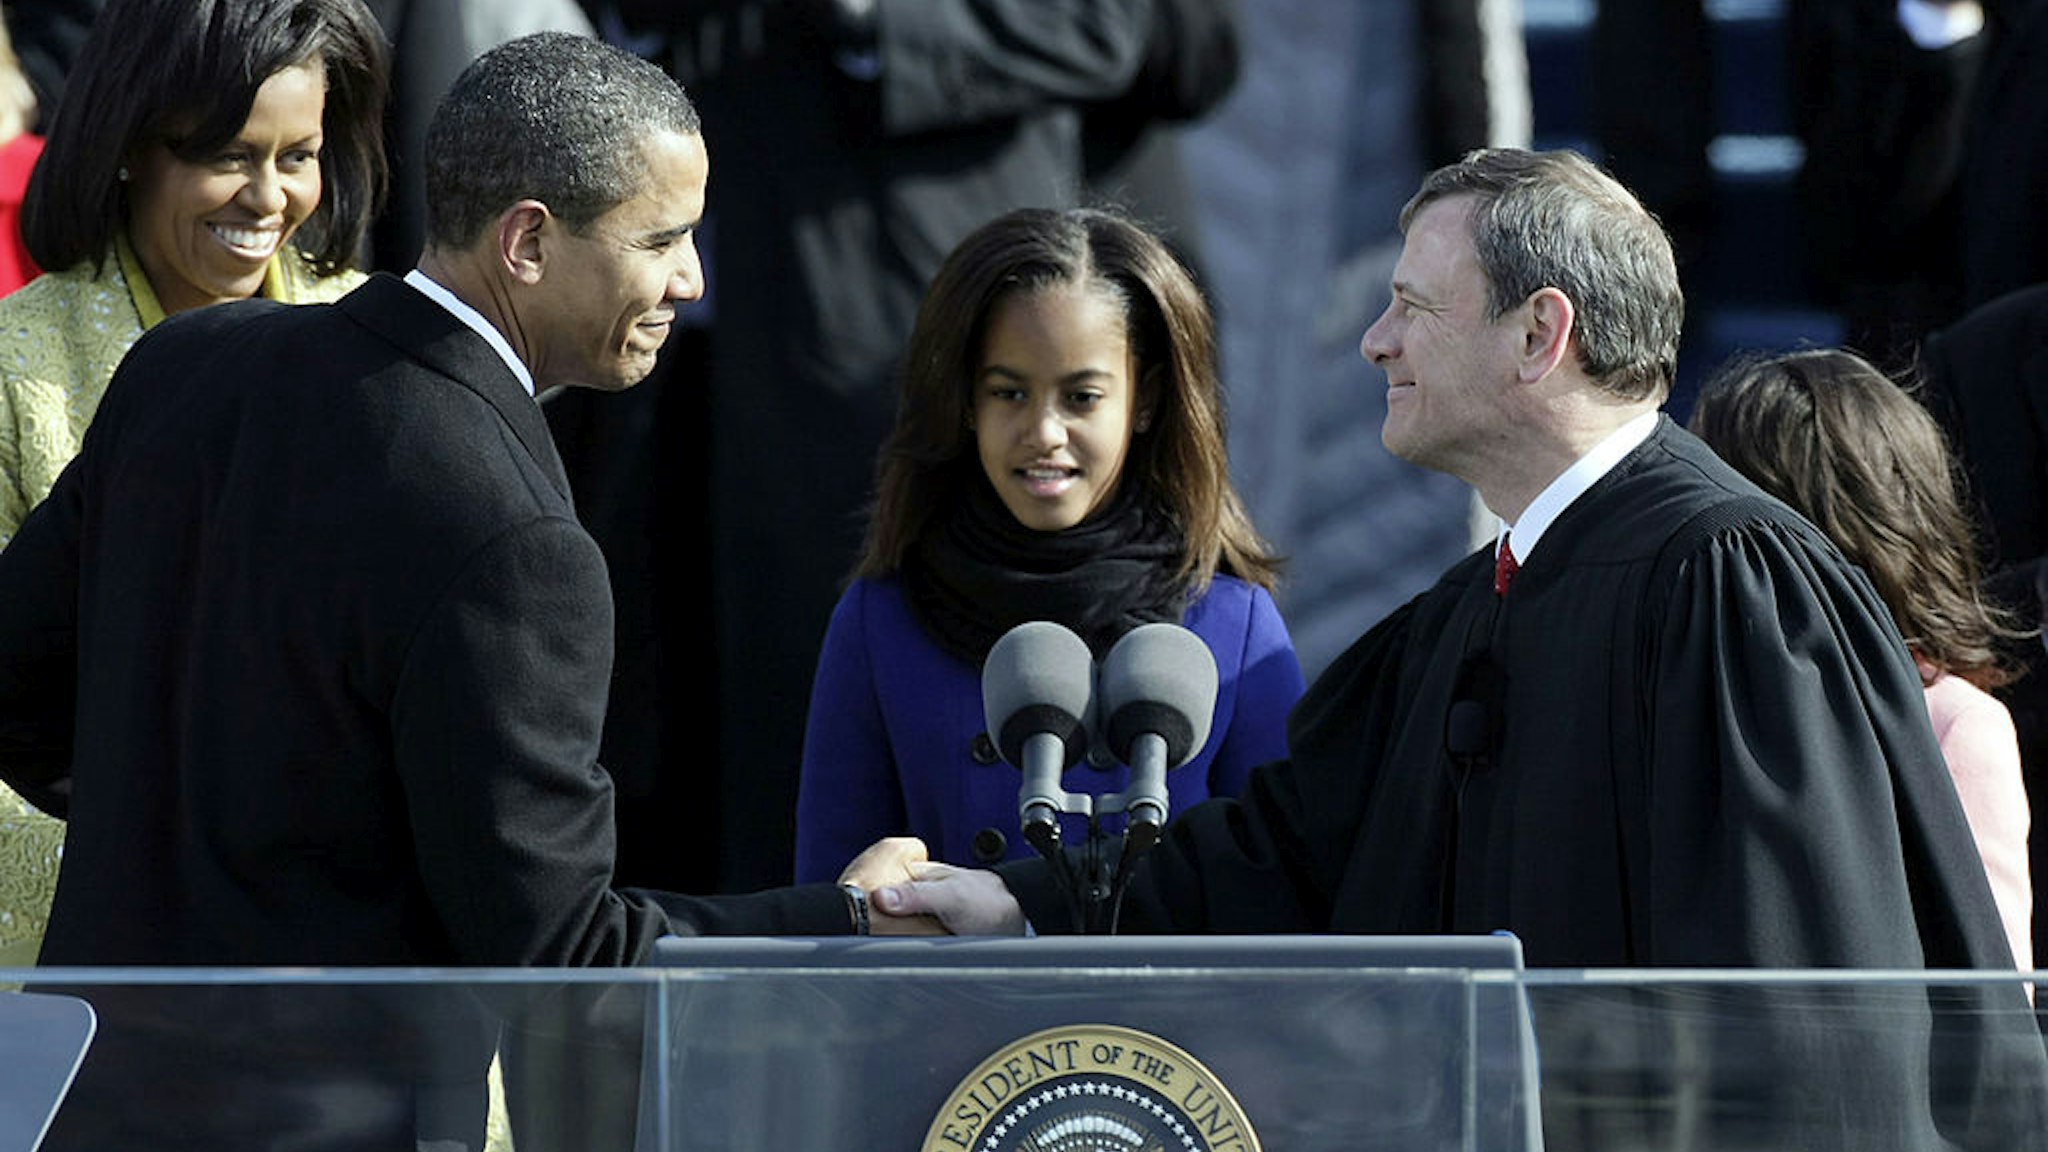 Barack H. Obama shakes the hand of Chief Justice John Roberts after his swearing in as the 44th president of the United Statesas on the West Front of the Capitol as his wife Michelle looks on January 20, 2009 in Washington, DC.